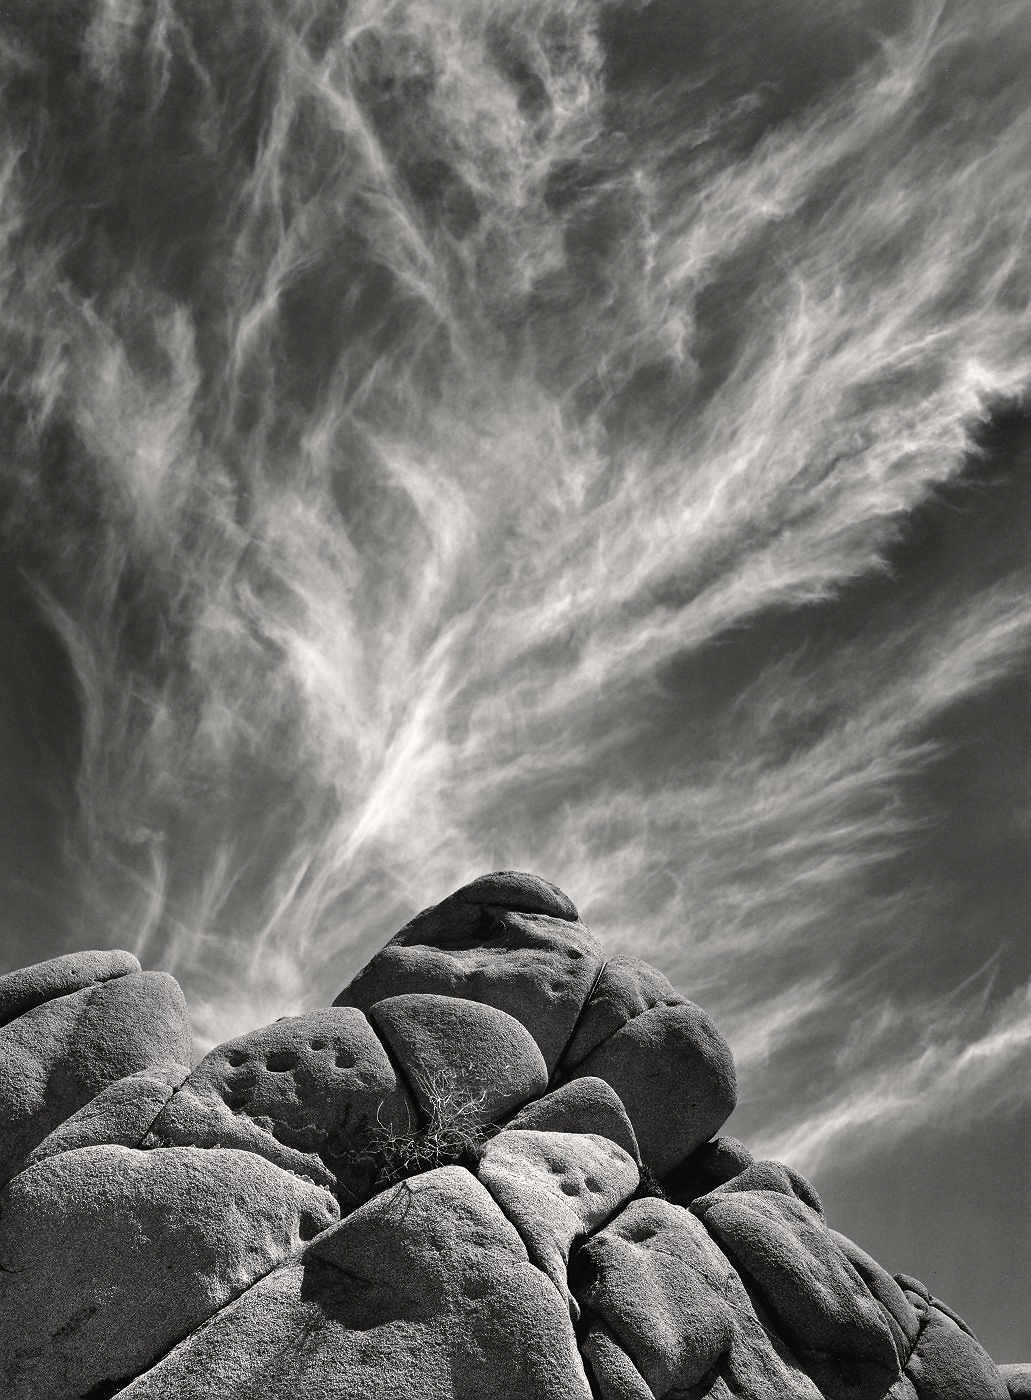 Rocks and Clouds1979